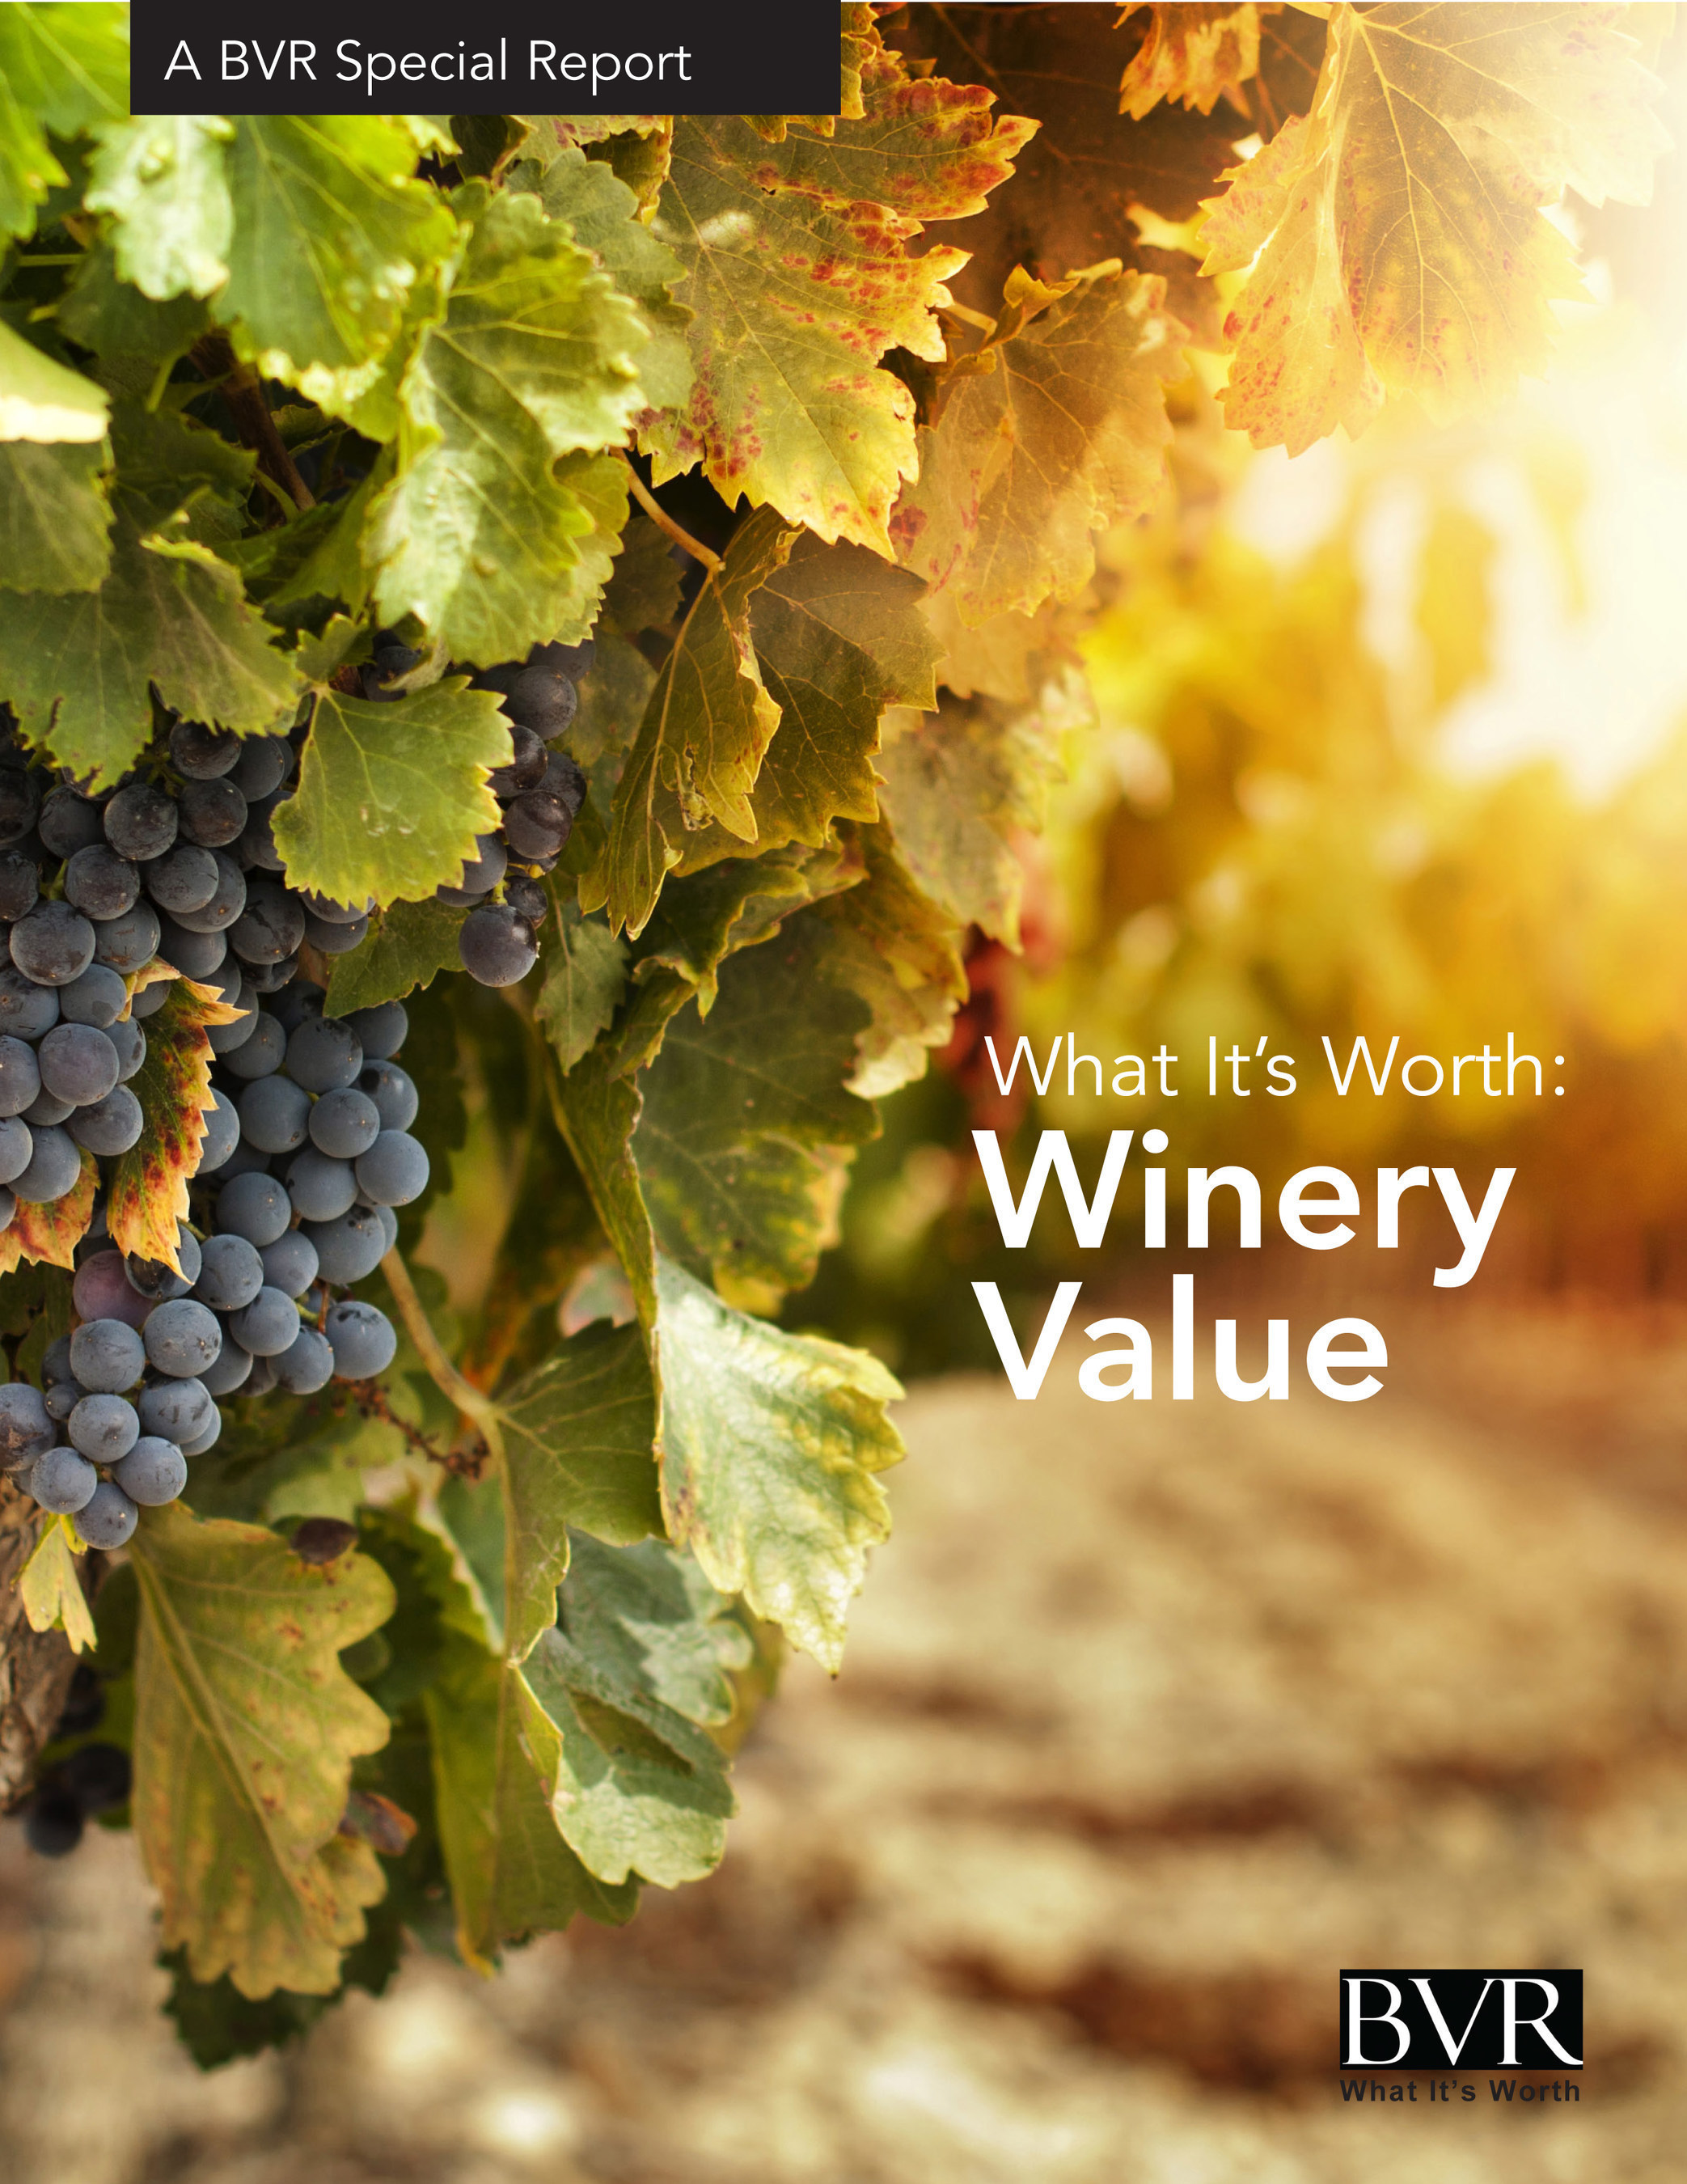 Just published - What It's Worth: Winery Value